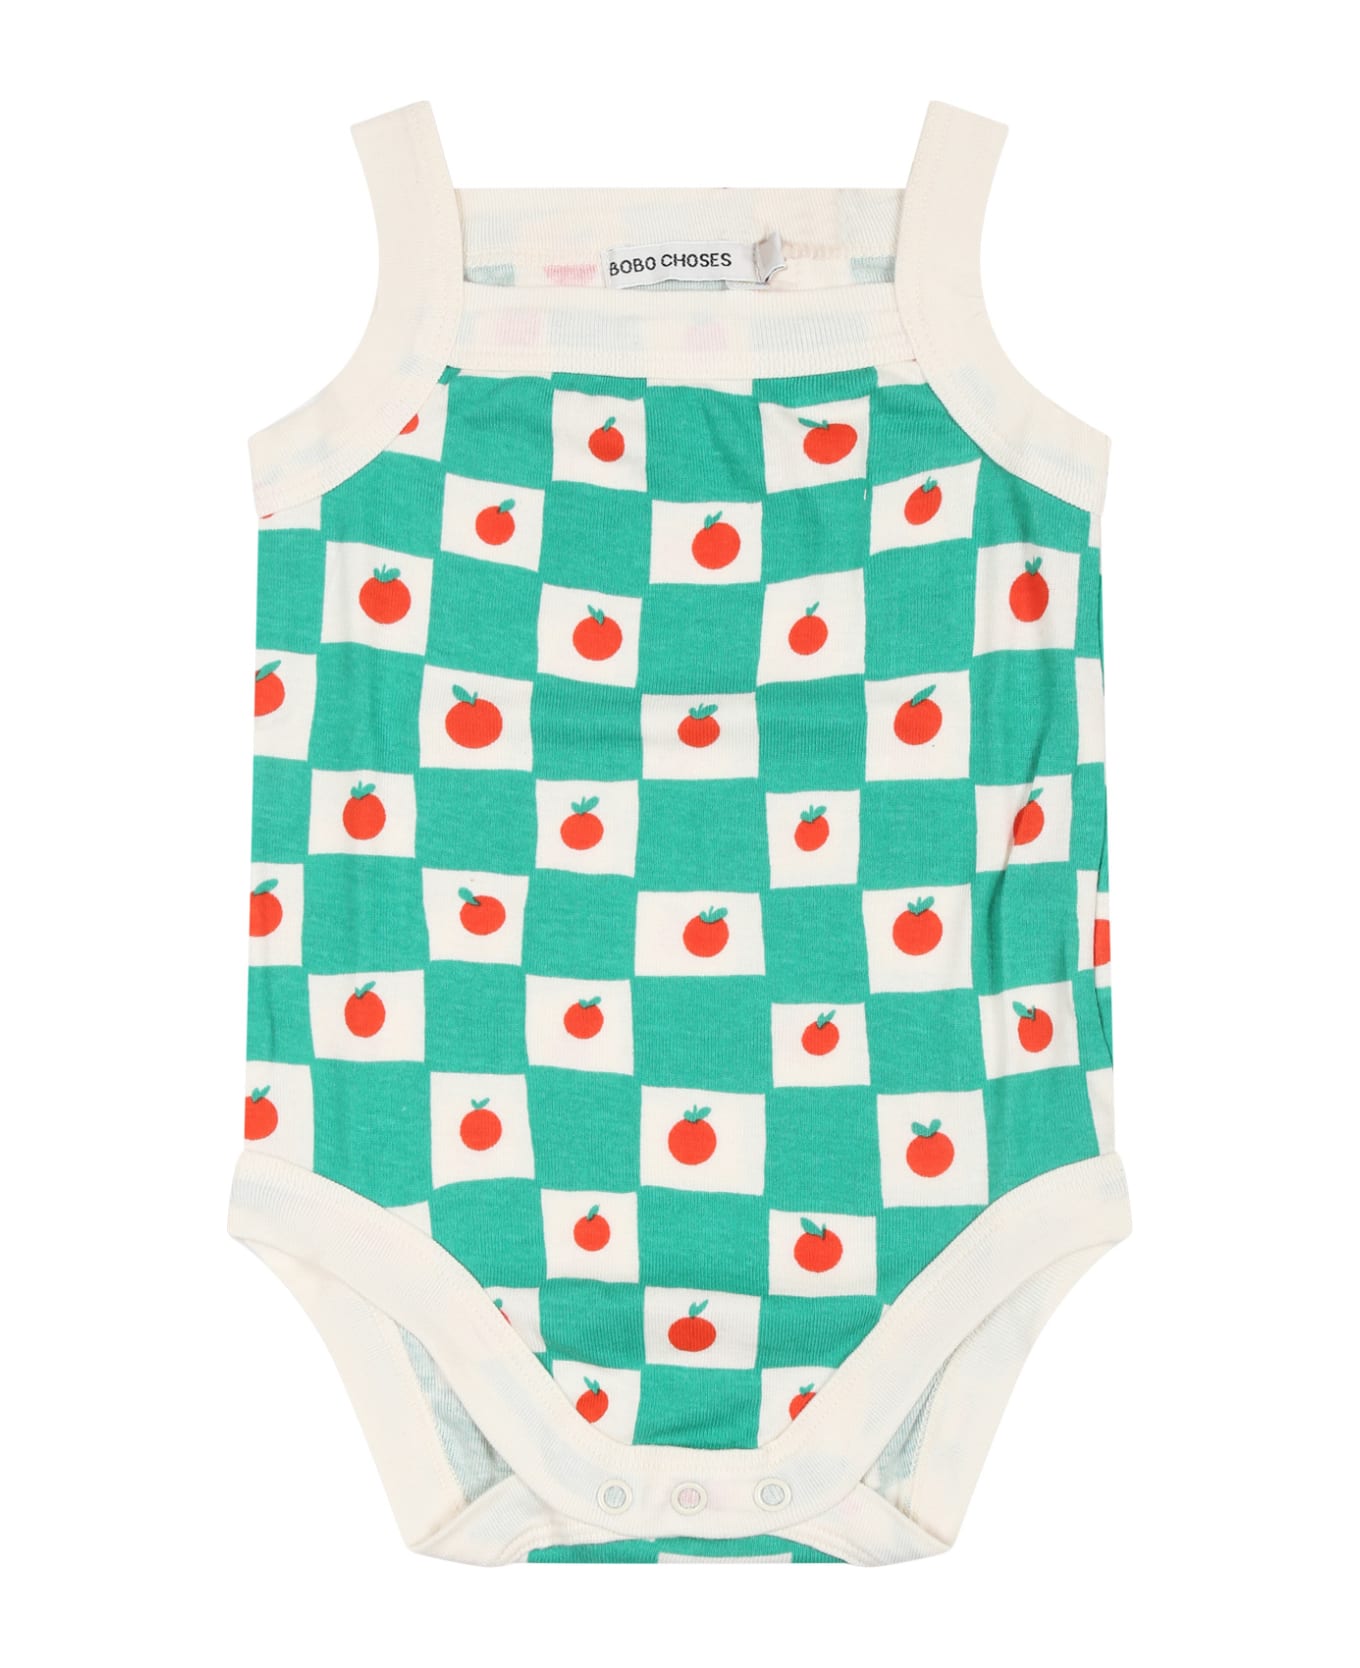 Bobo Choses Green Bodysuit For Babykids With Tomatoes - Green